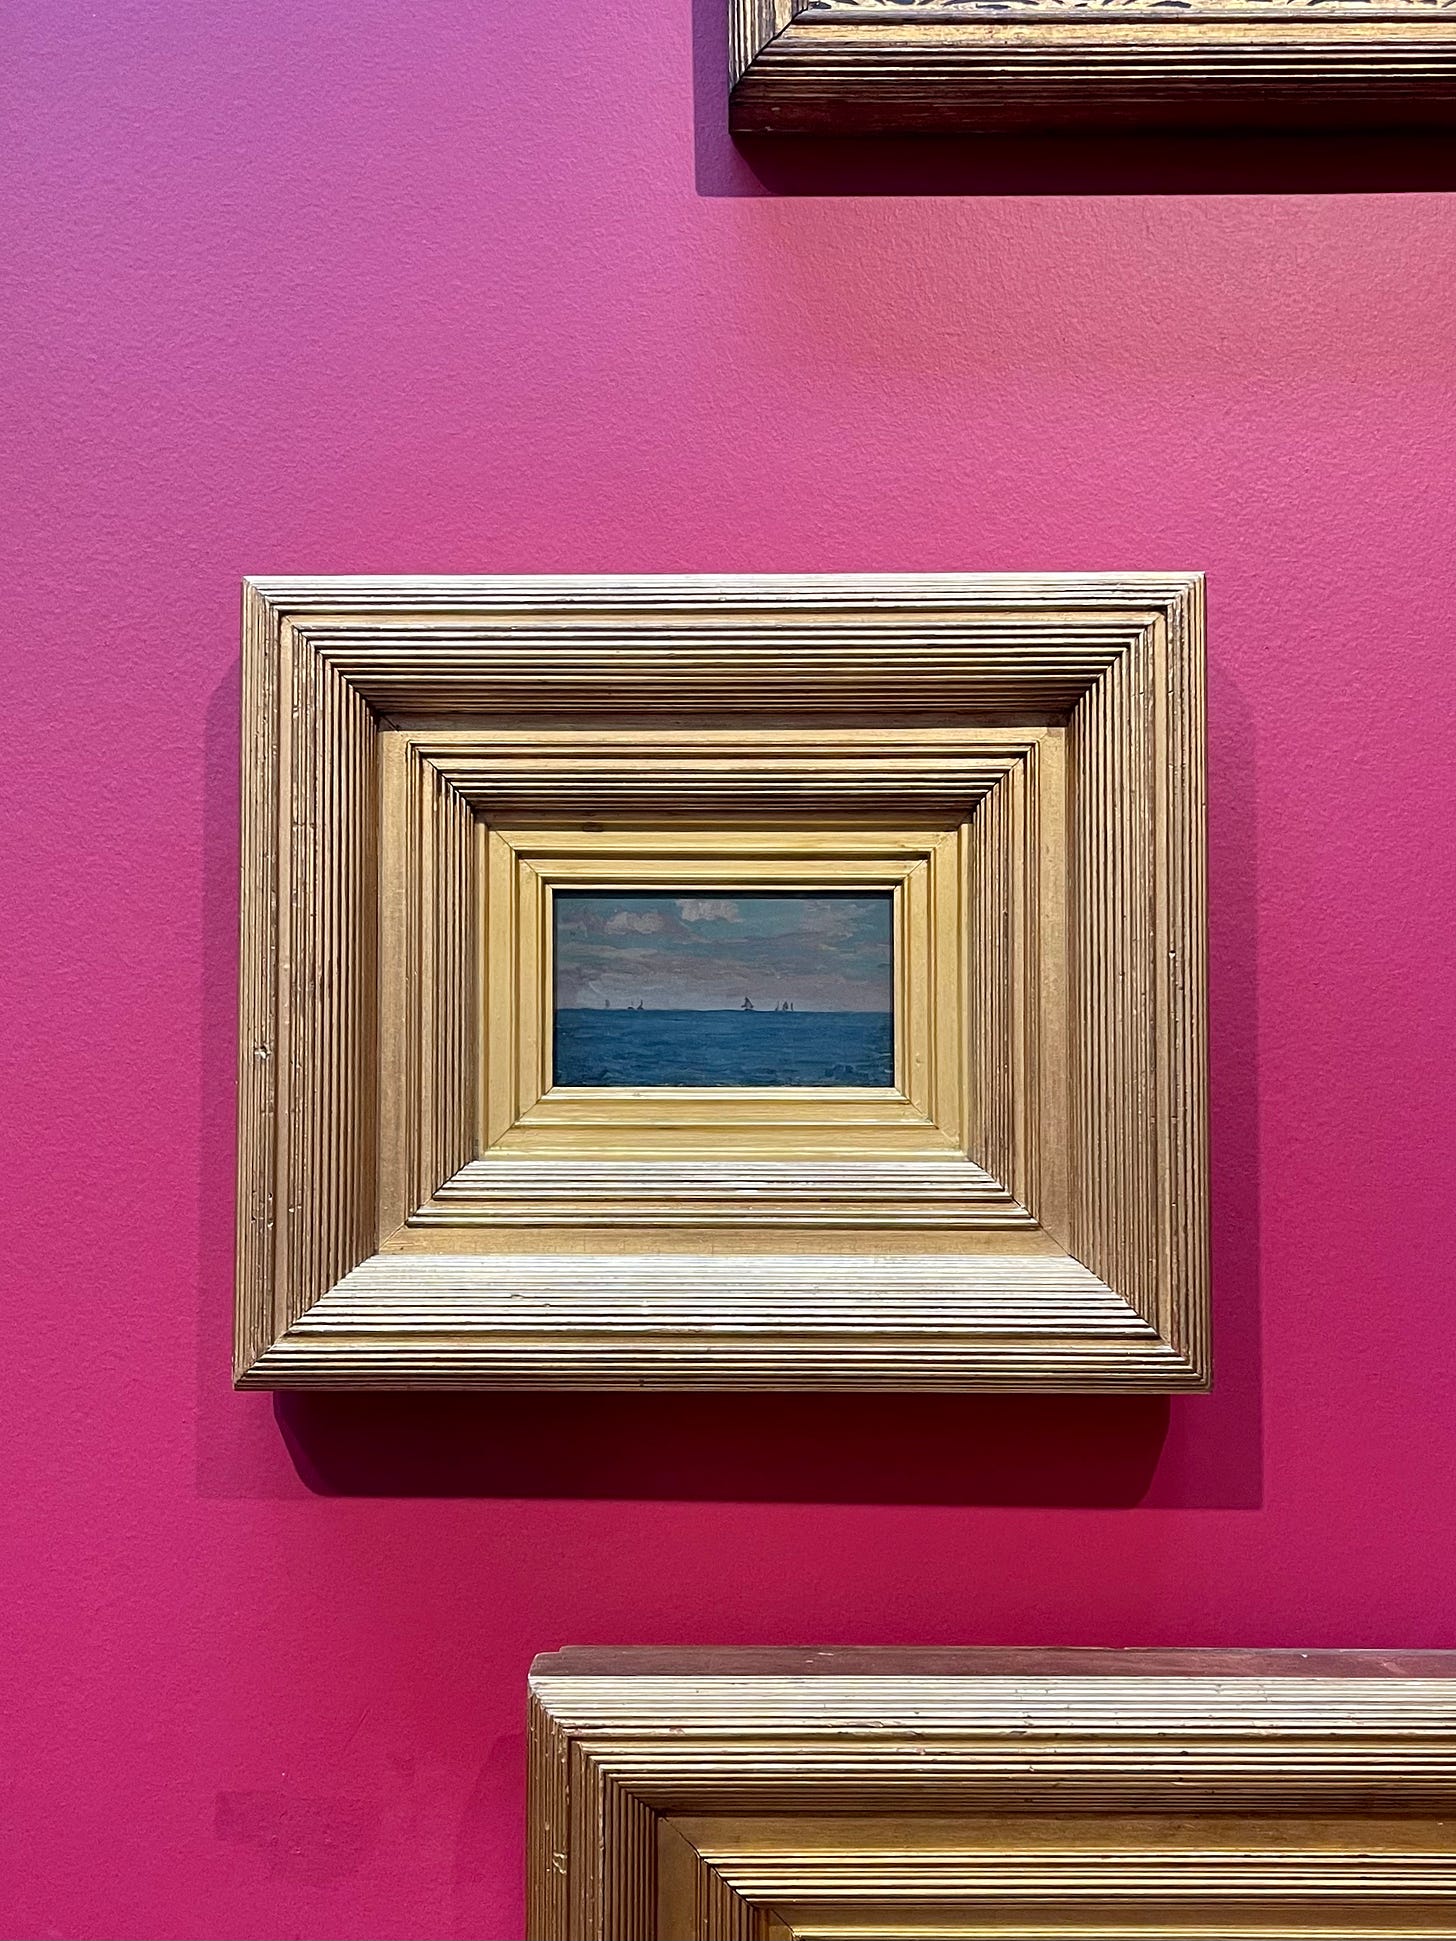 A framed painting at the Hunterian Museum in Glasgow UK